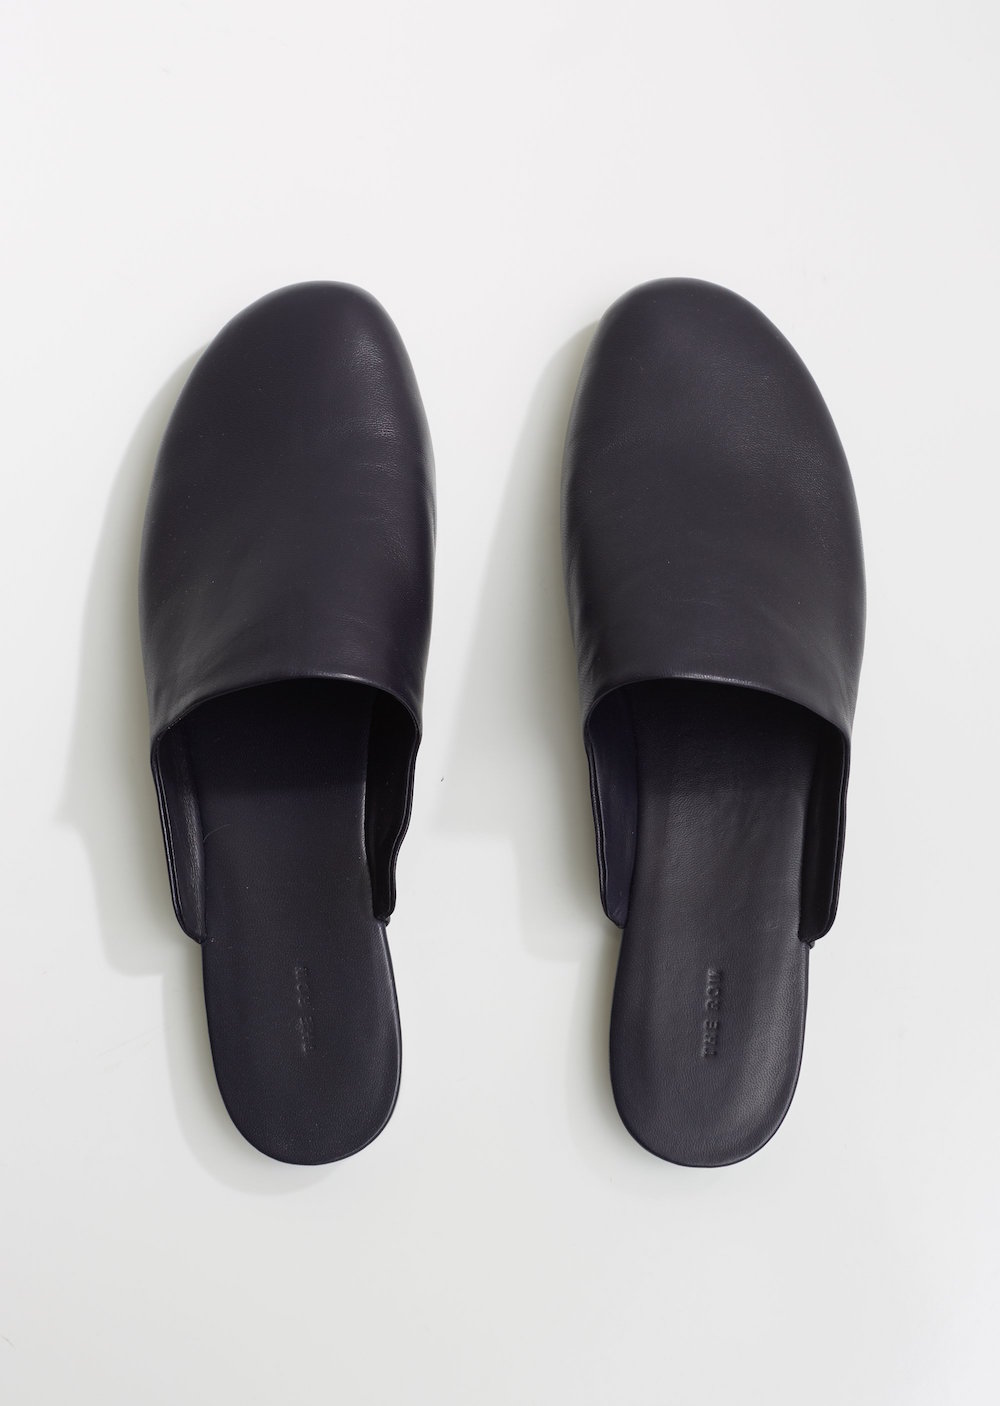 20 Best Slippers Designed to Be Worn Outside - theFashionSpot